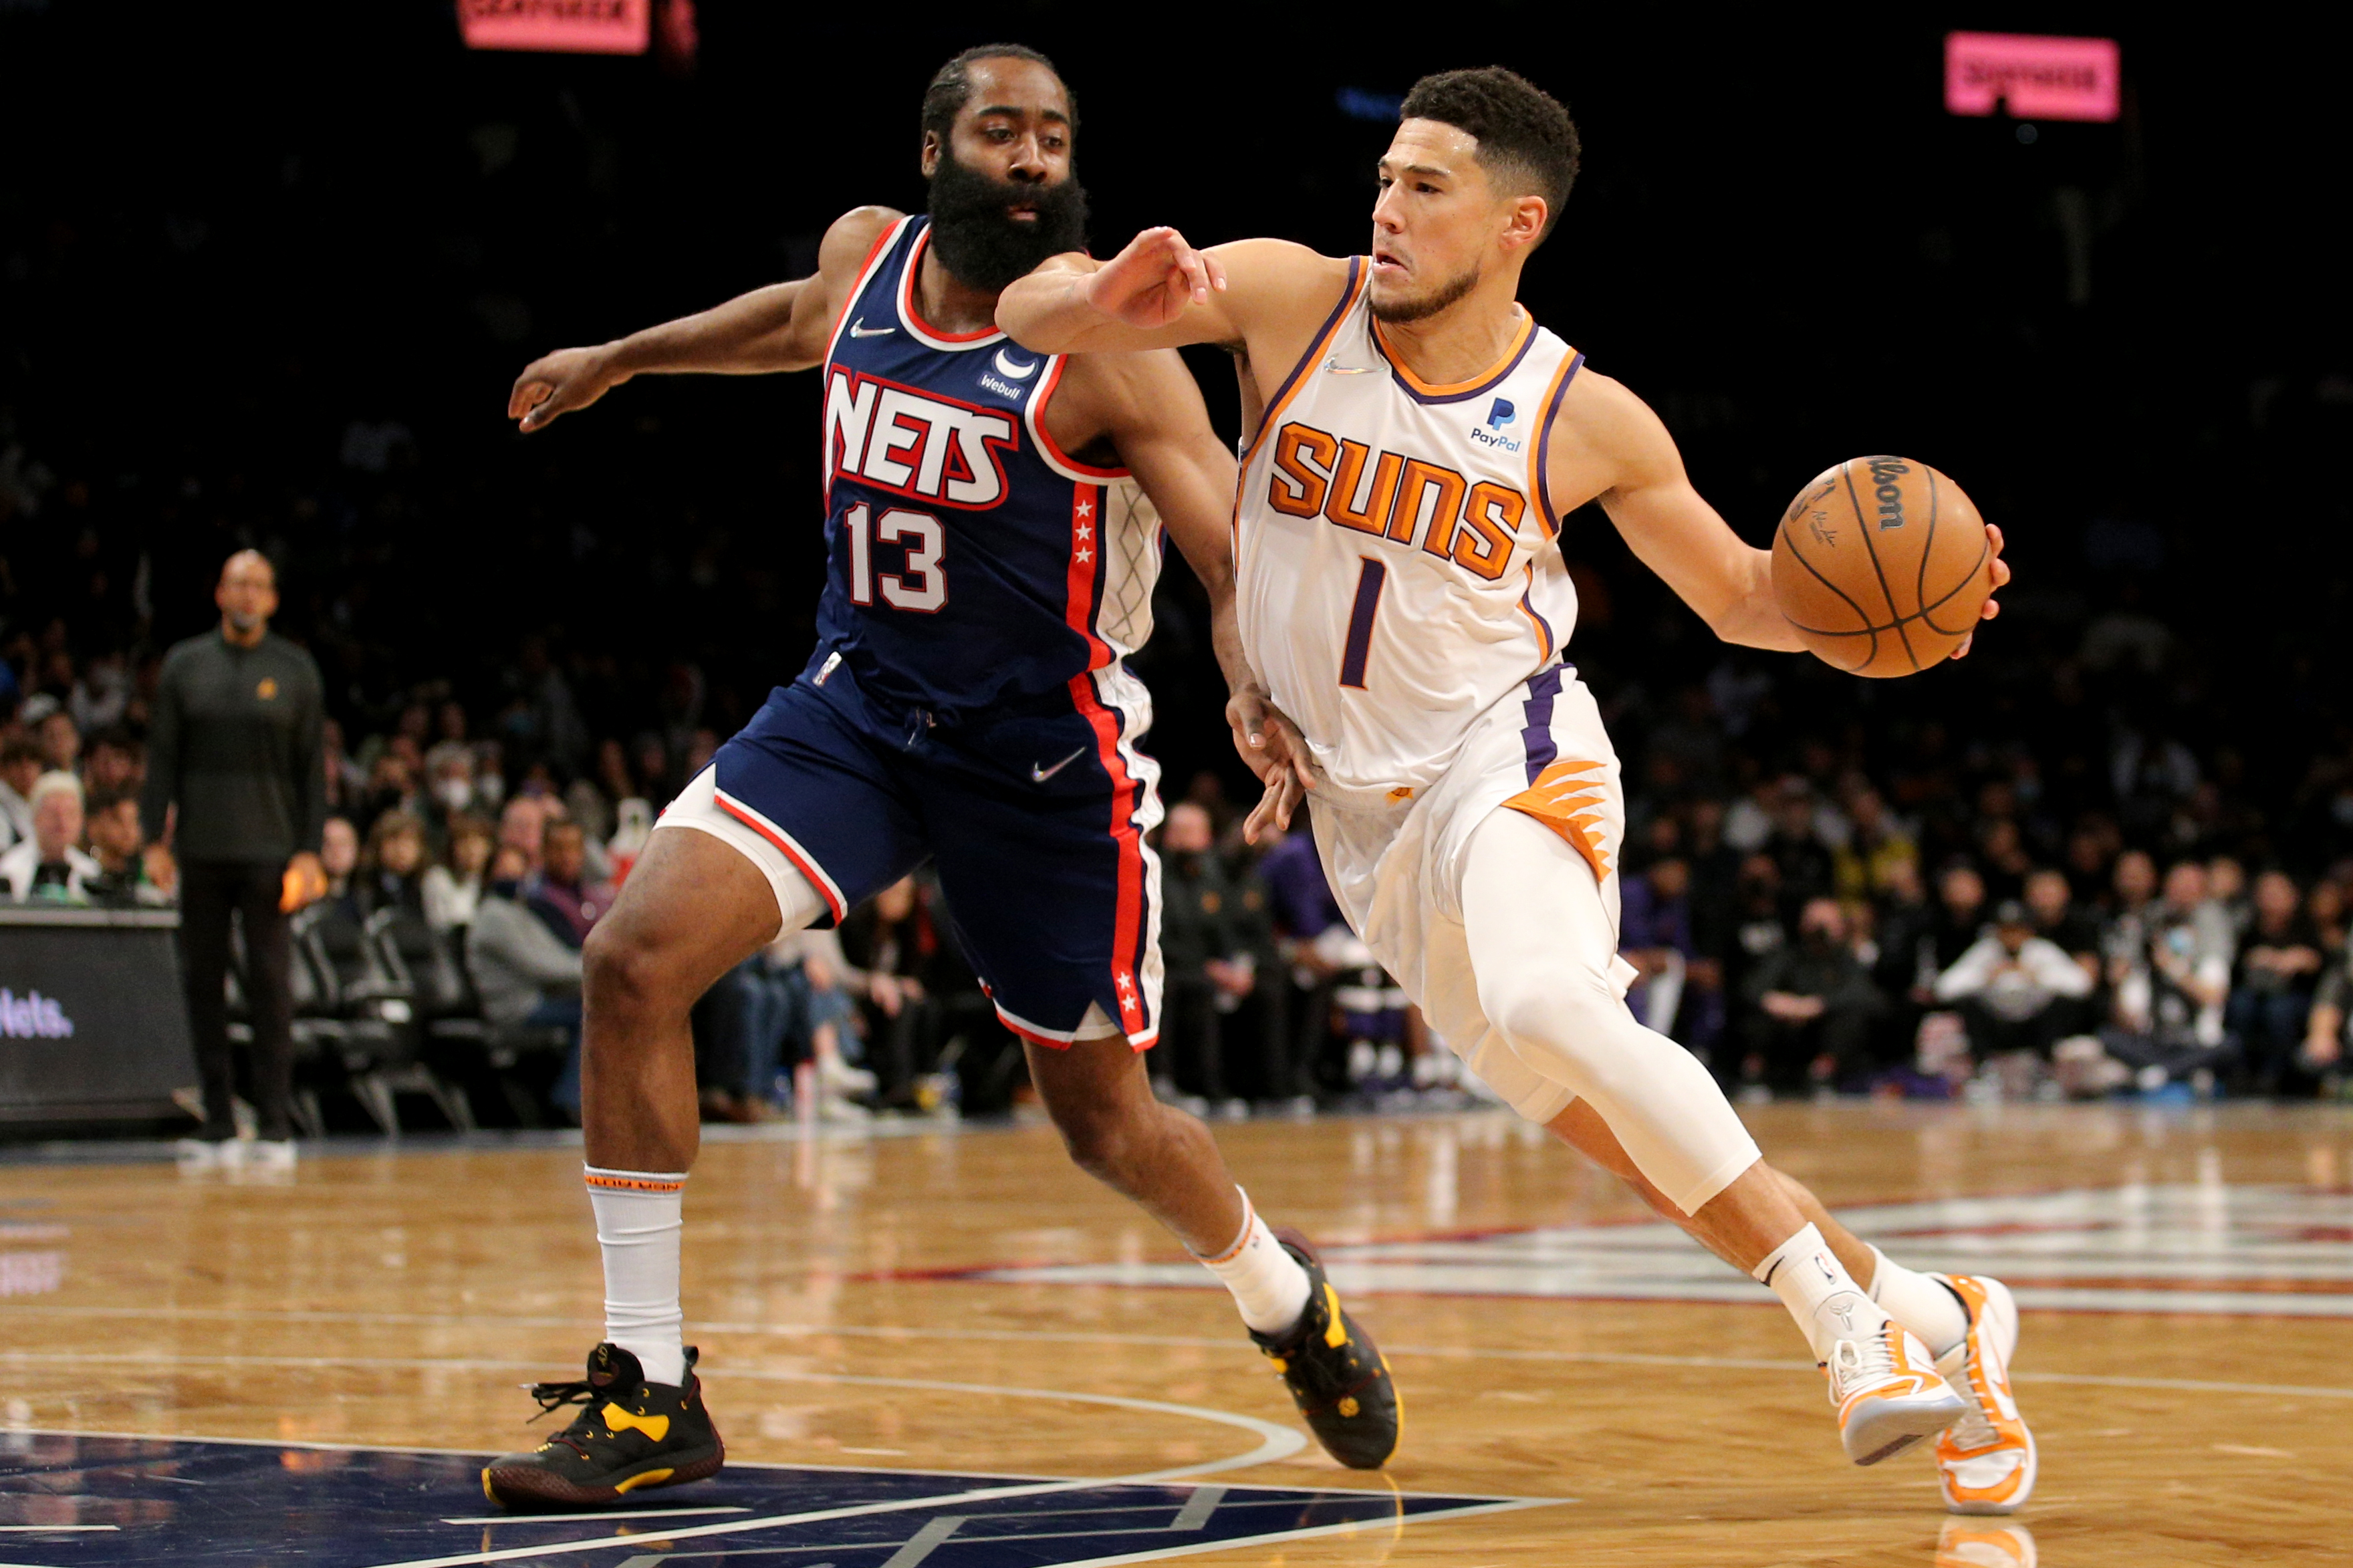 Nov 27, 2021; Brooklyn, New York, USA; Phoenix Suns guard Devin Booker (1) drives to the basket around Brooklyn Nets guard James Harden (13) during the first quarter at Barclays Center. / Brad Penner-USA TODAY Sports